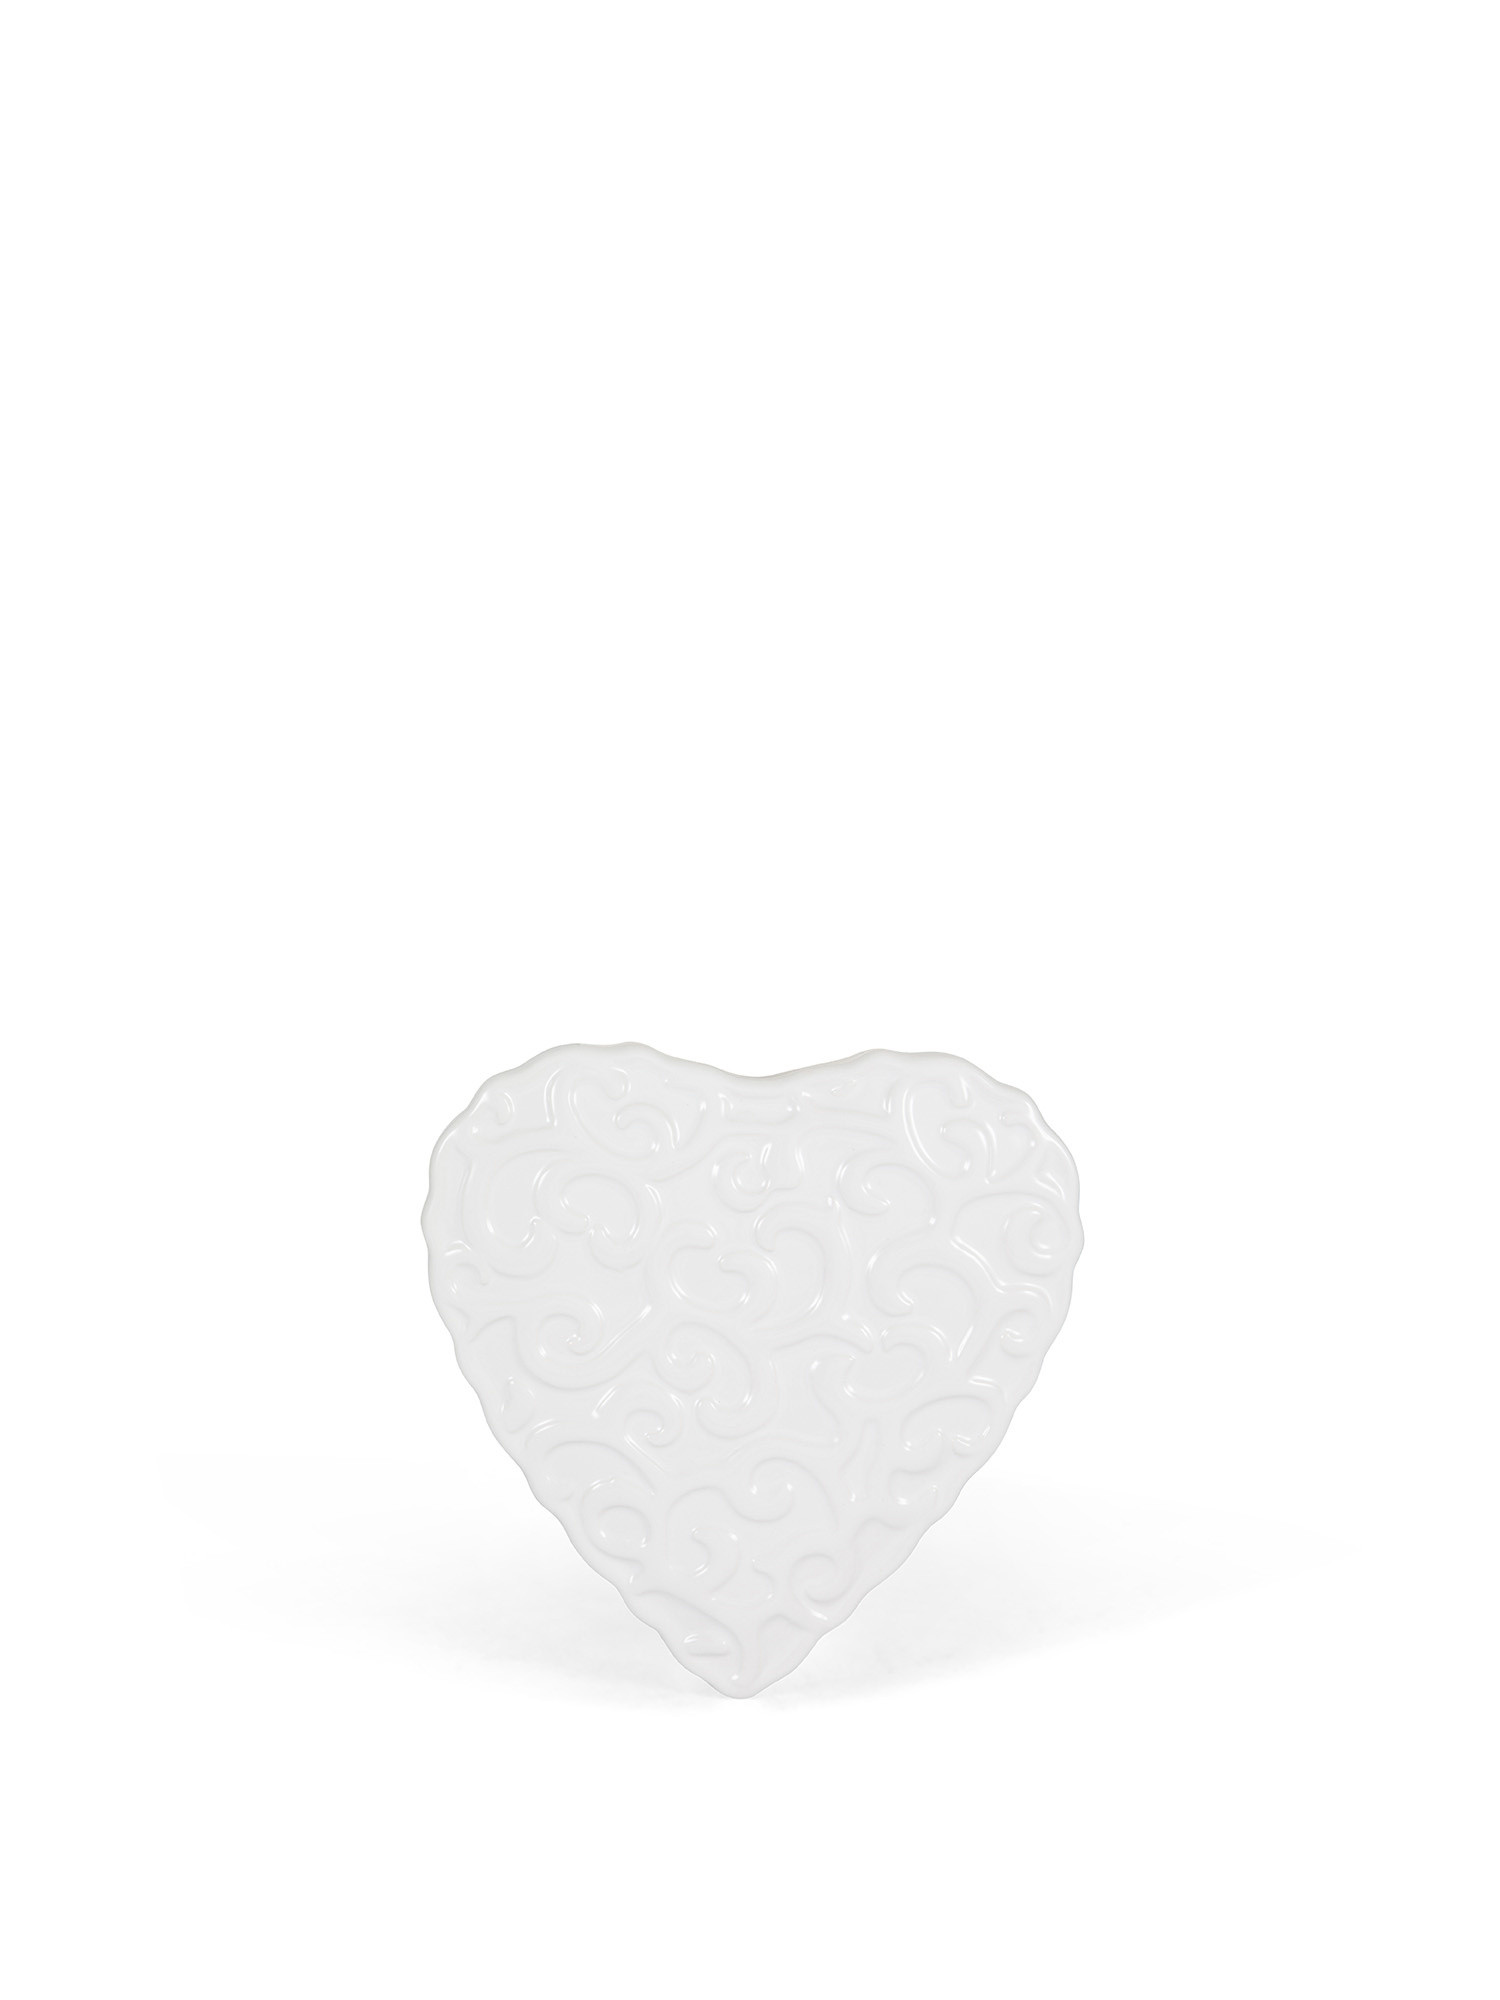 Ceramic heart decorated humidifier, White, large image number 0